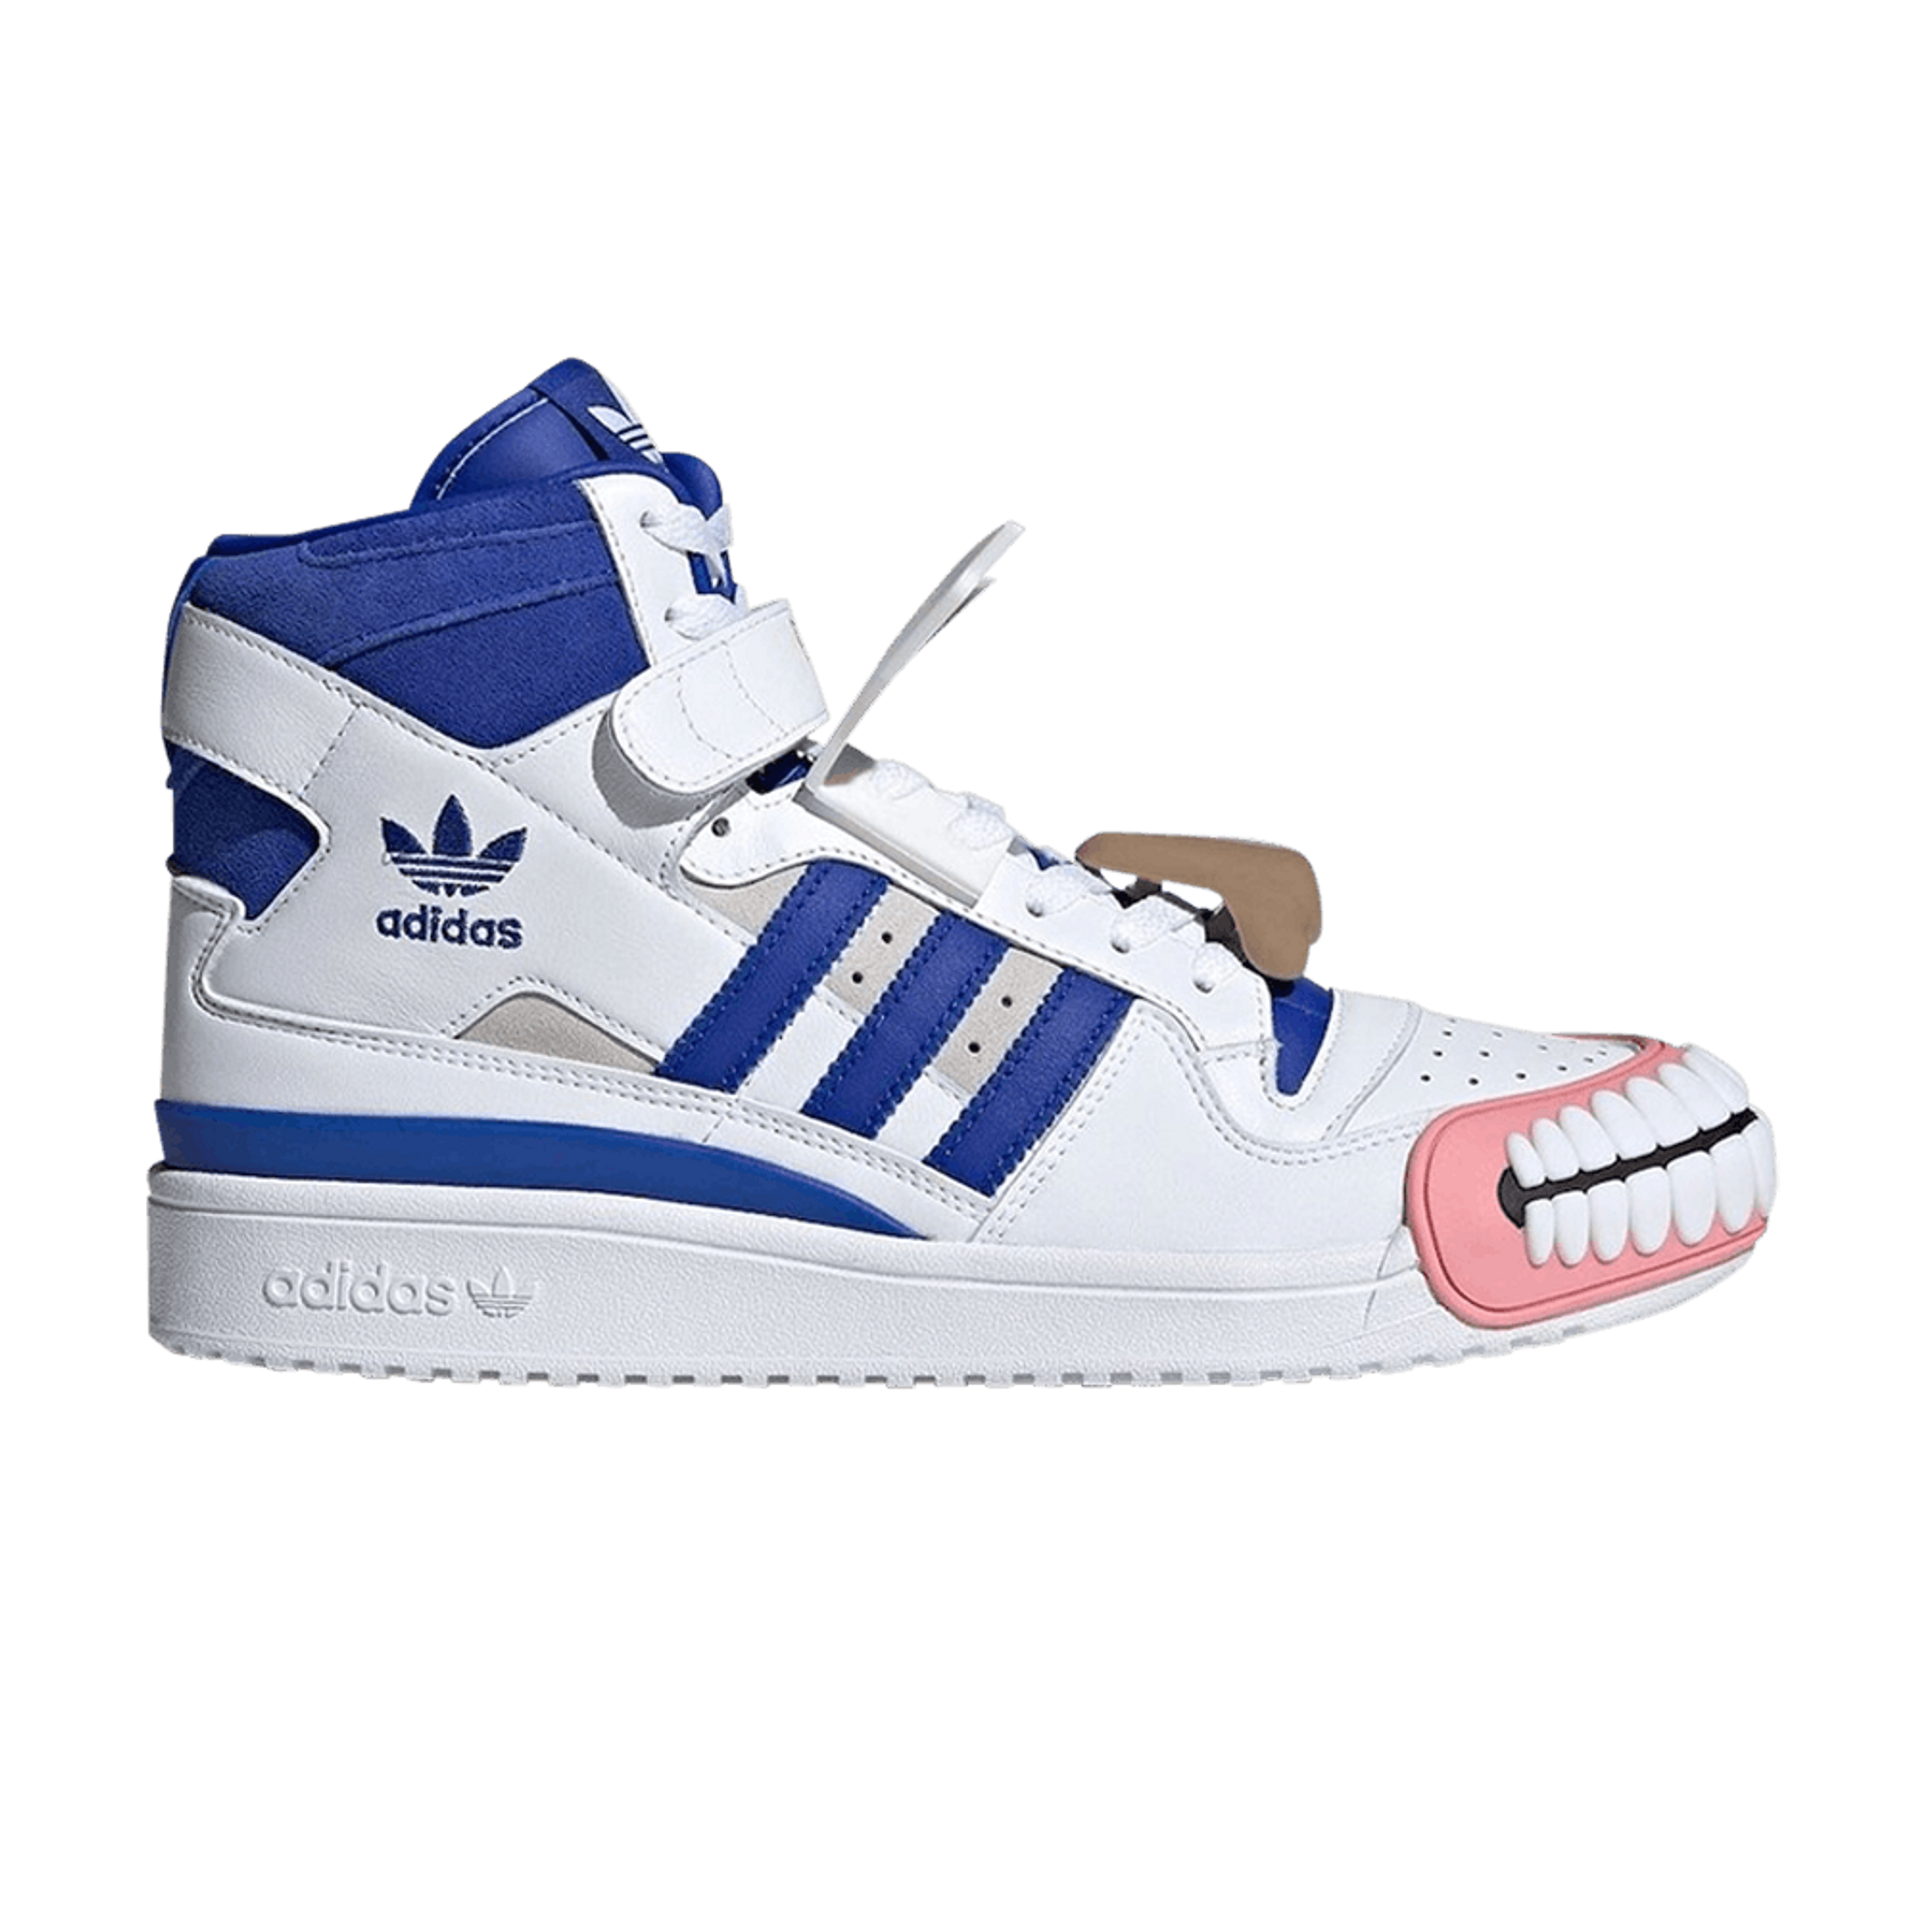 adidas Kerwin Frost x Forum High 'Humanchives'